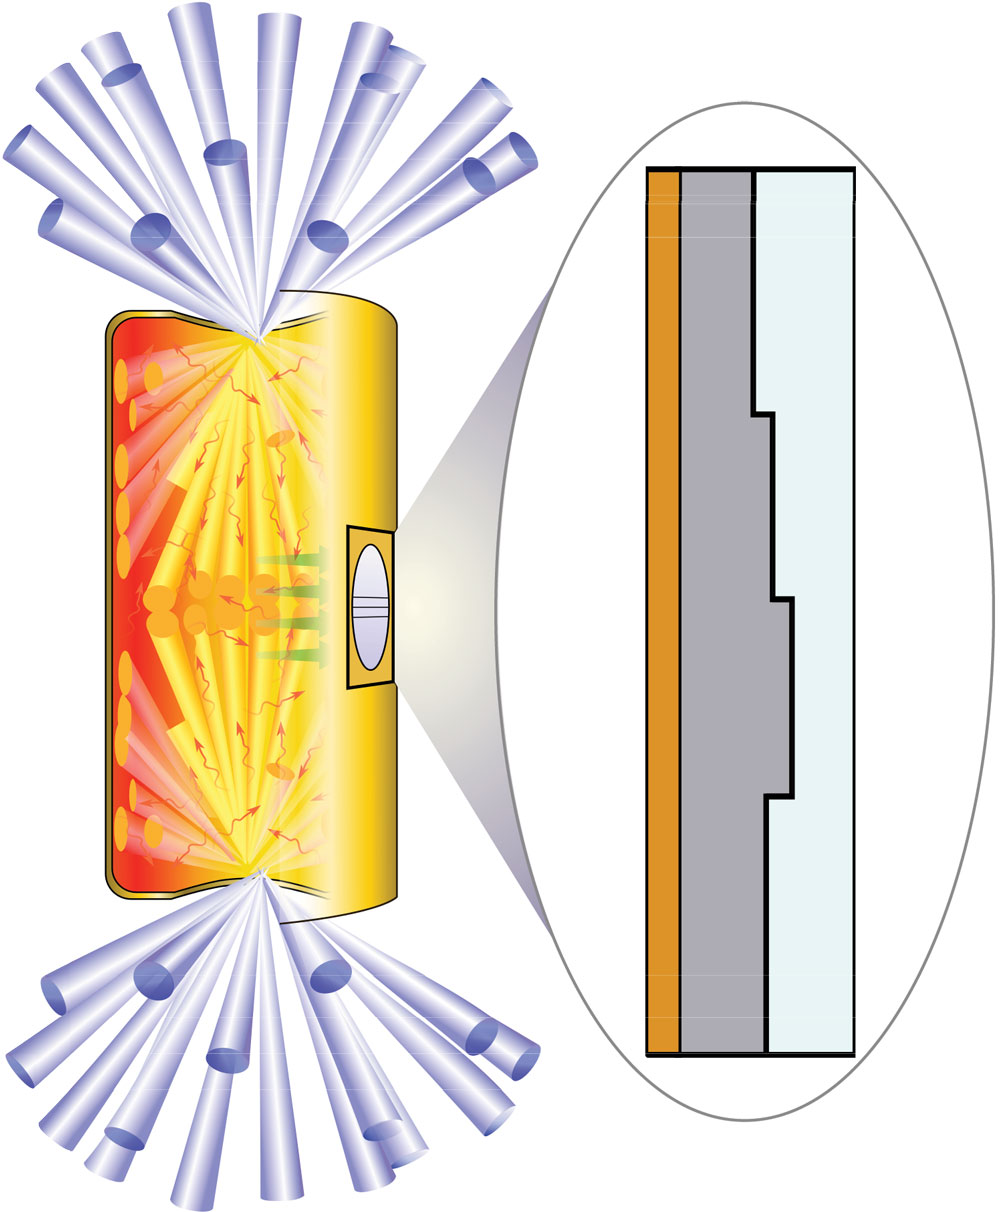 Laser light entering the top and bottom of a hohlraum cylinder